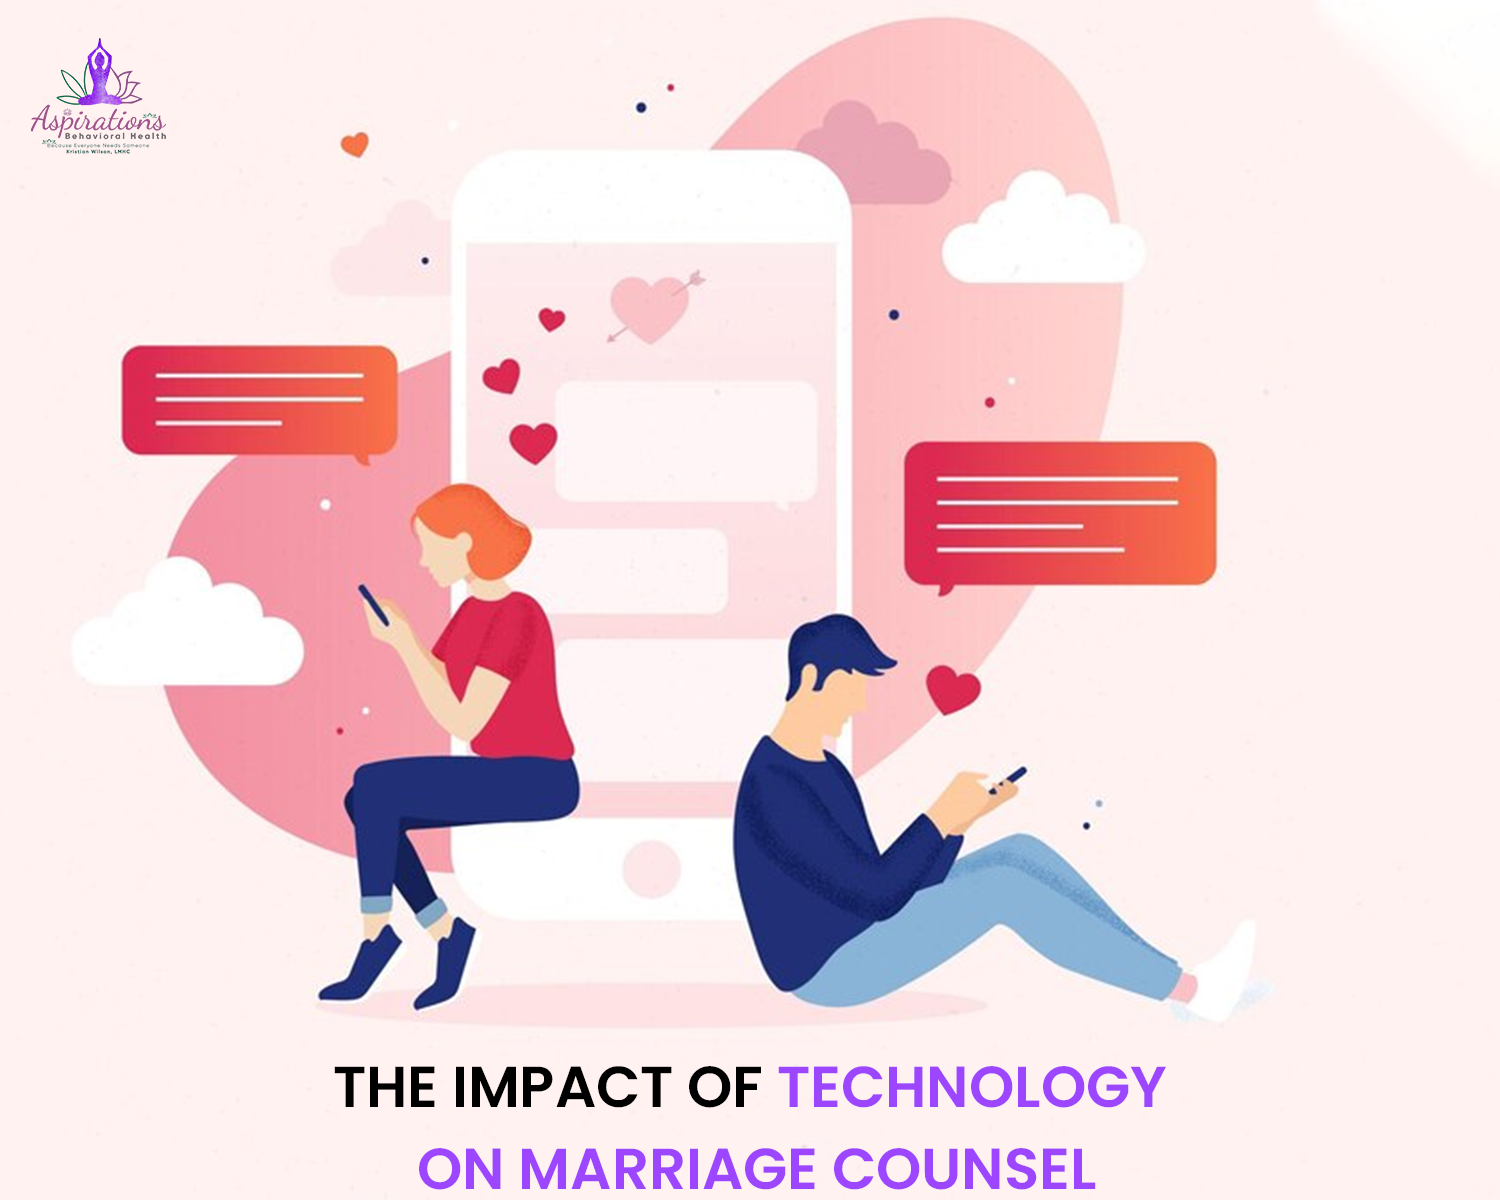 The Impact of Technology on Marriage Counsel